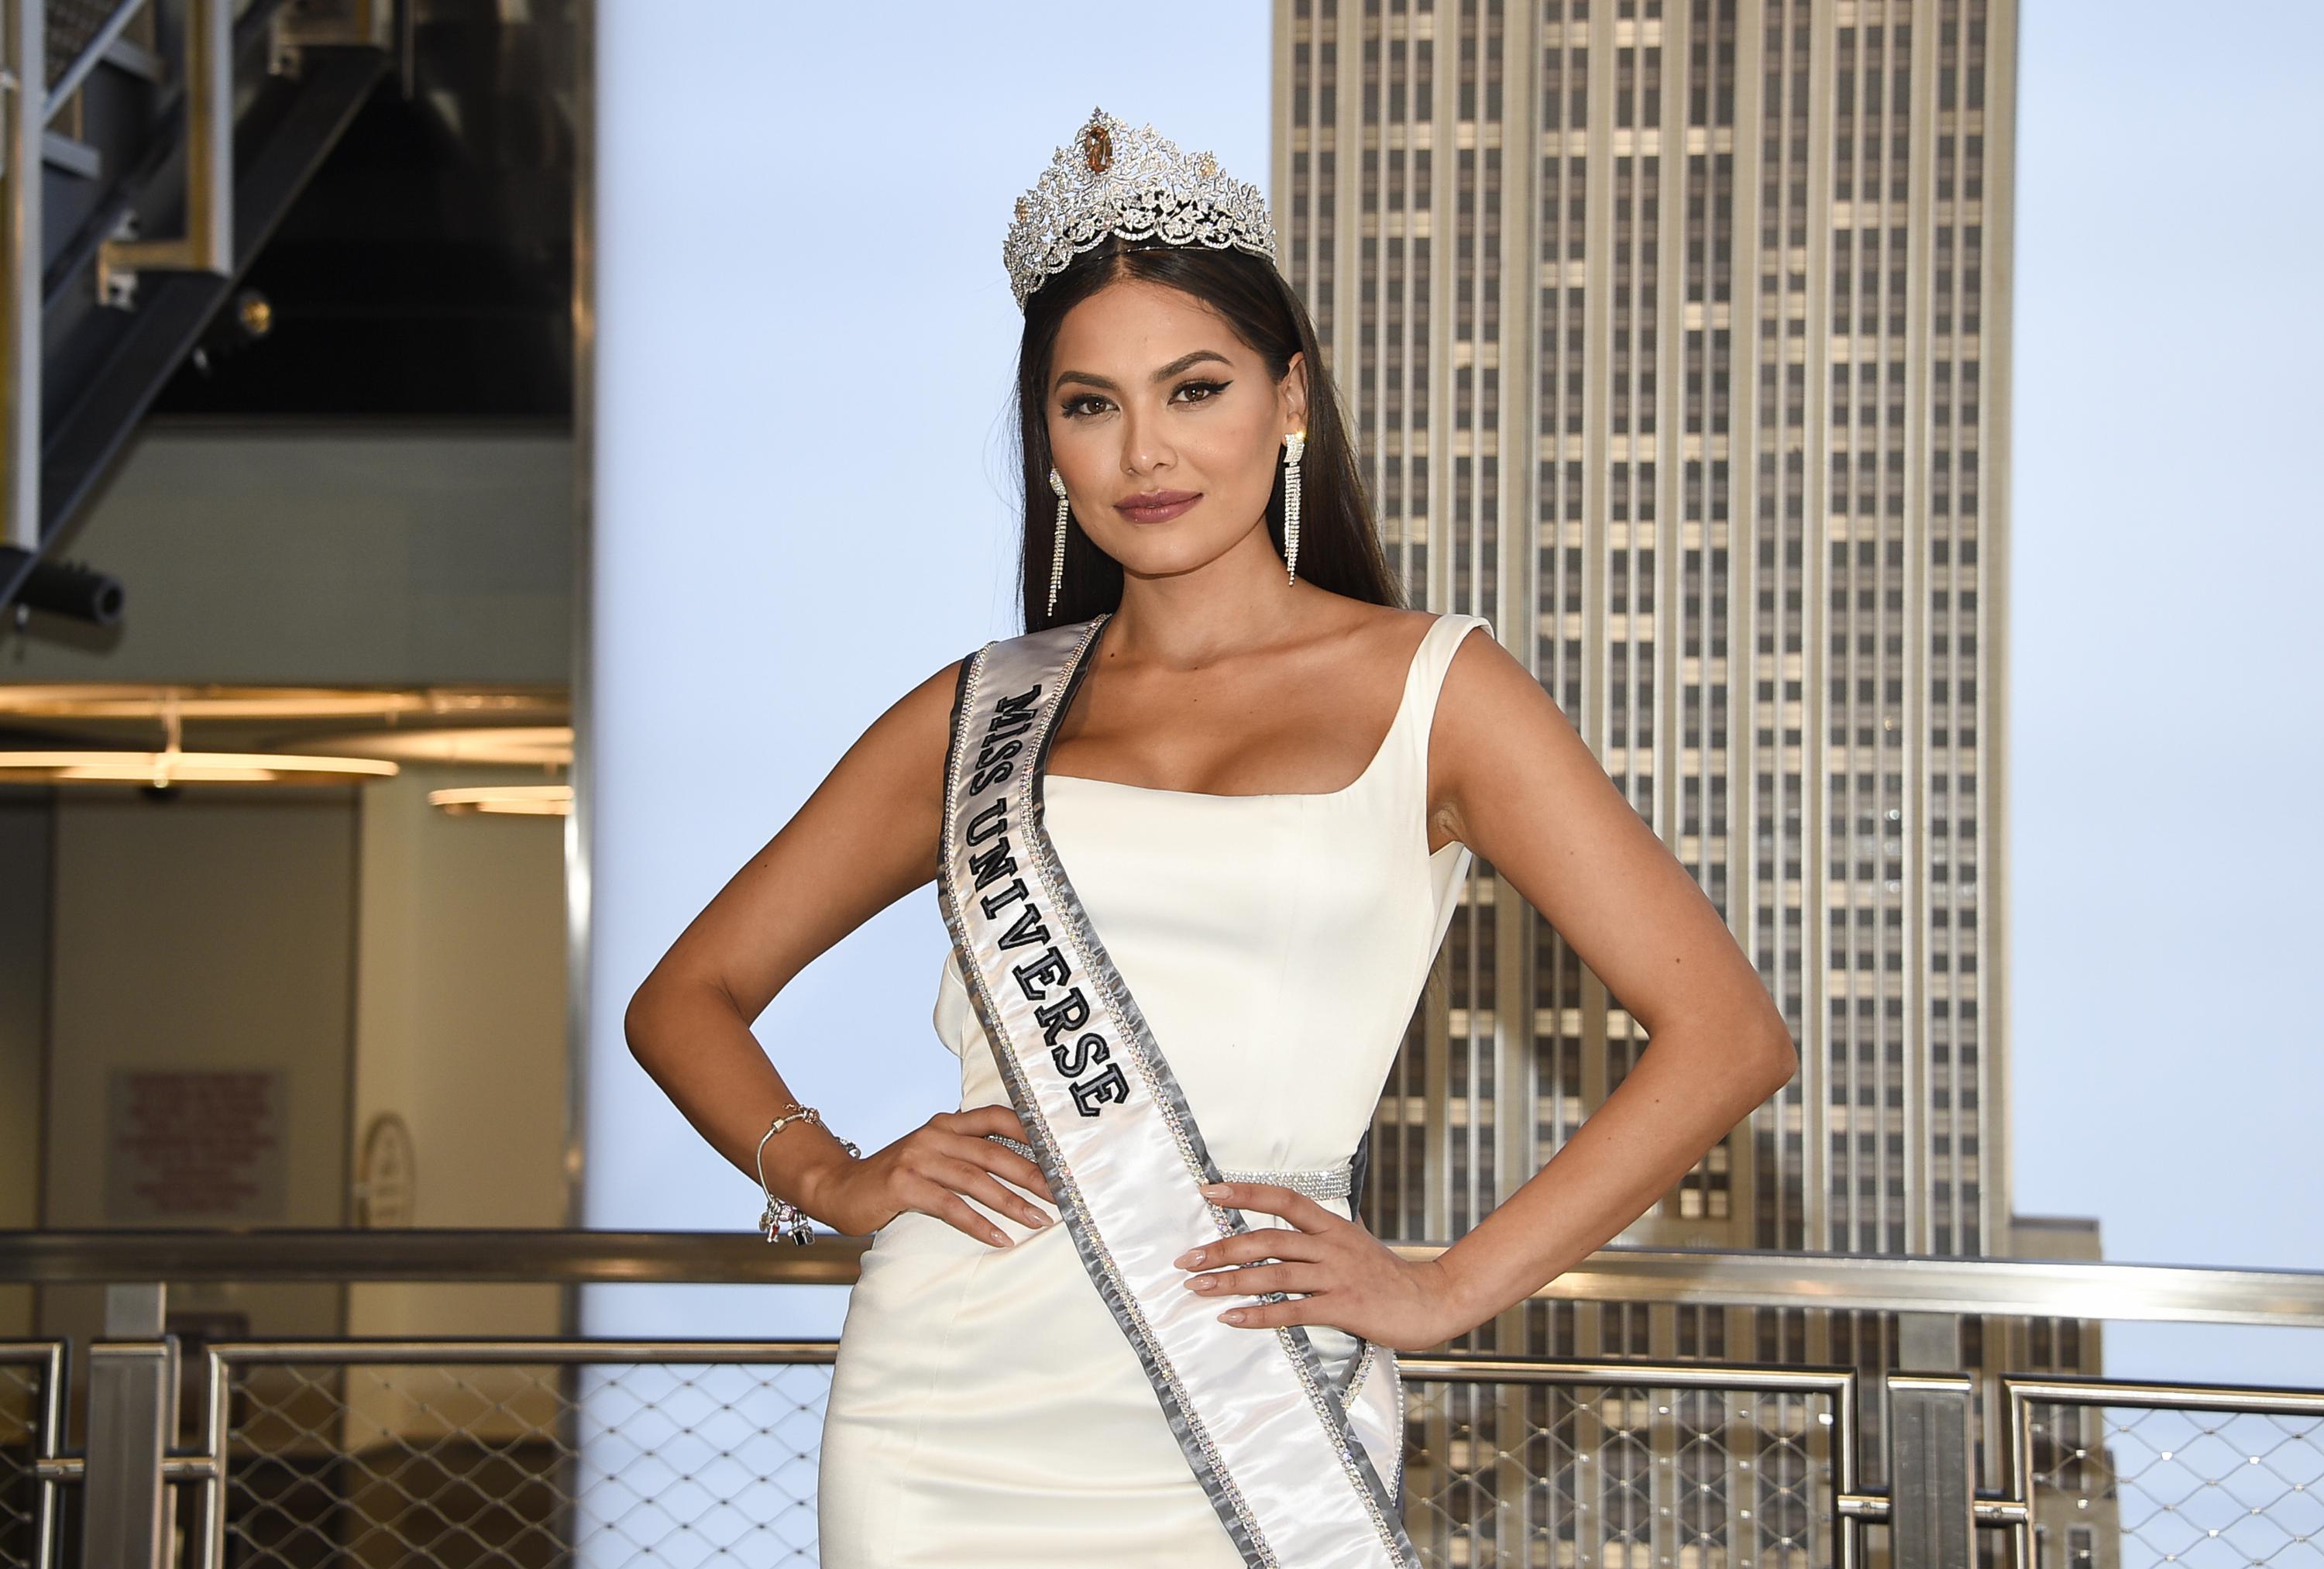 Miss Universe competition will be held in Israel in December AP News